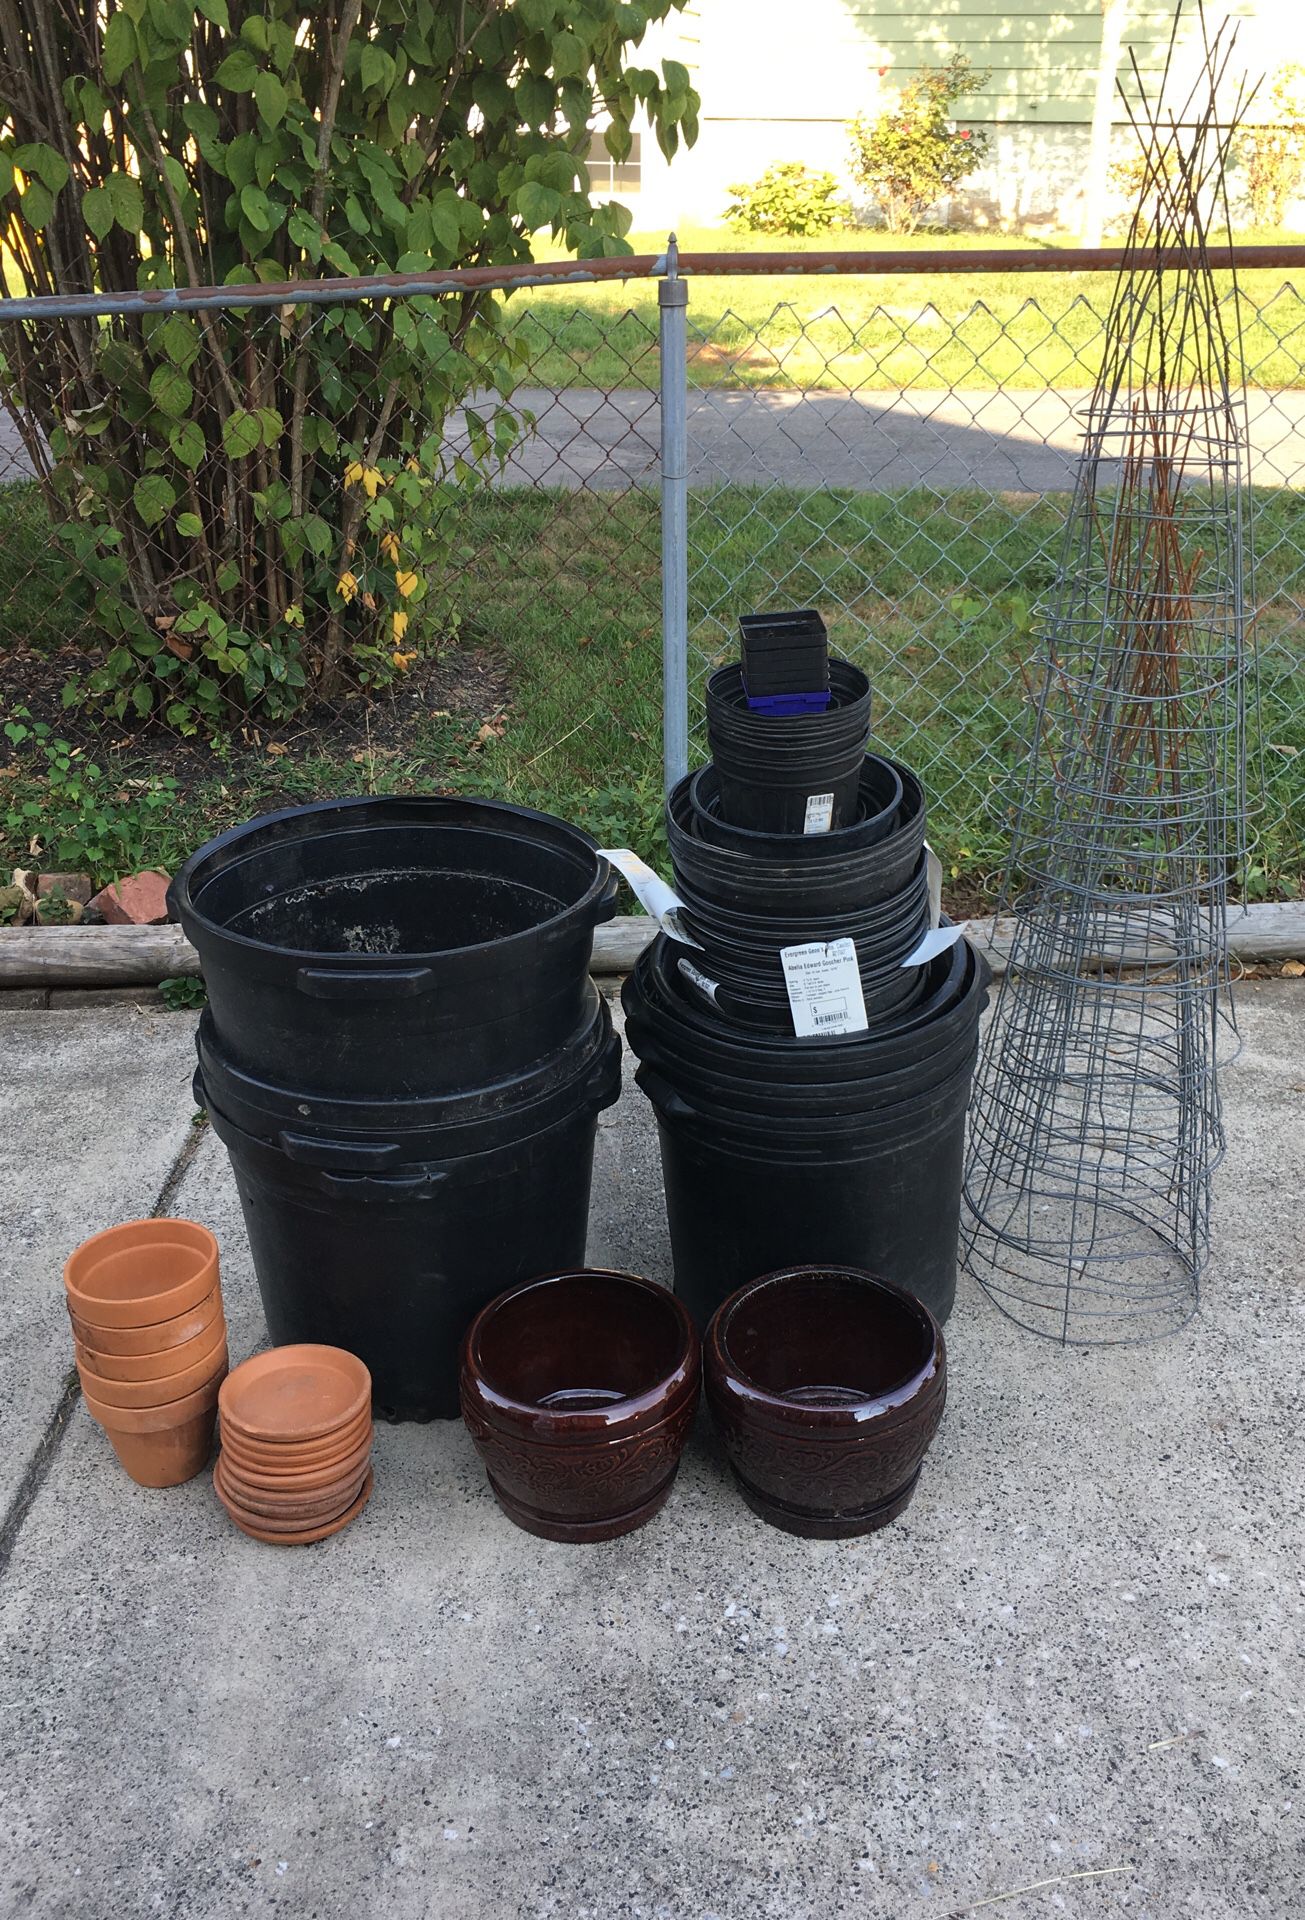 Variety plant containers and tomato cages